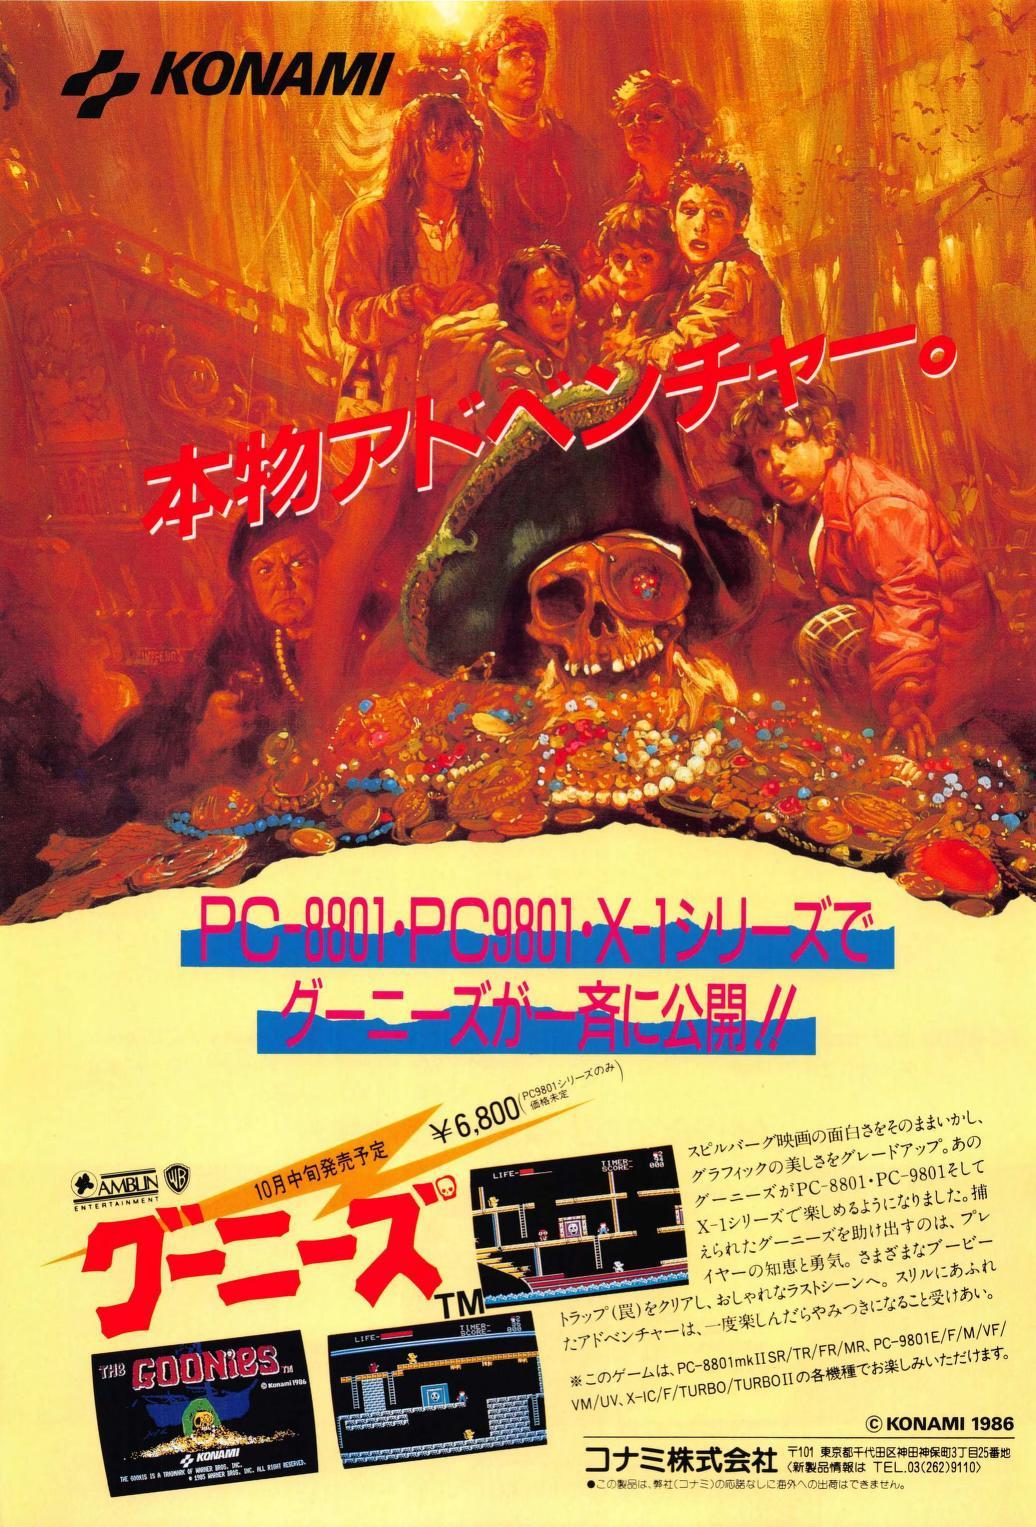 ‘The Goonies’[PC-88 / PC-98 / X1] [JAPAN] [MAGAZINE] [1986]
• I/O, November 1986
• Scanned by taihen, via The Internet Archive
• The Goonies may never say die, but they also never said to remember their Konami computer game, who later developed its...